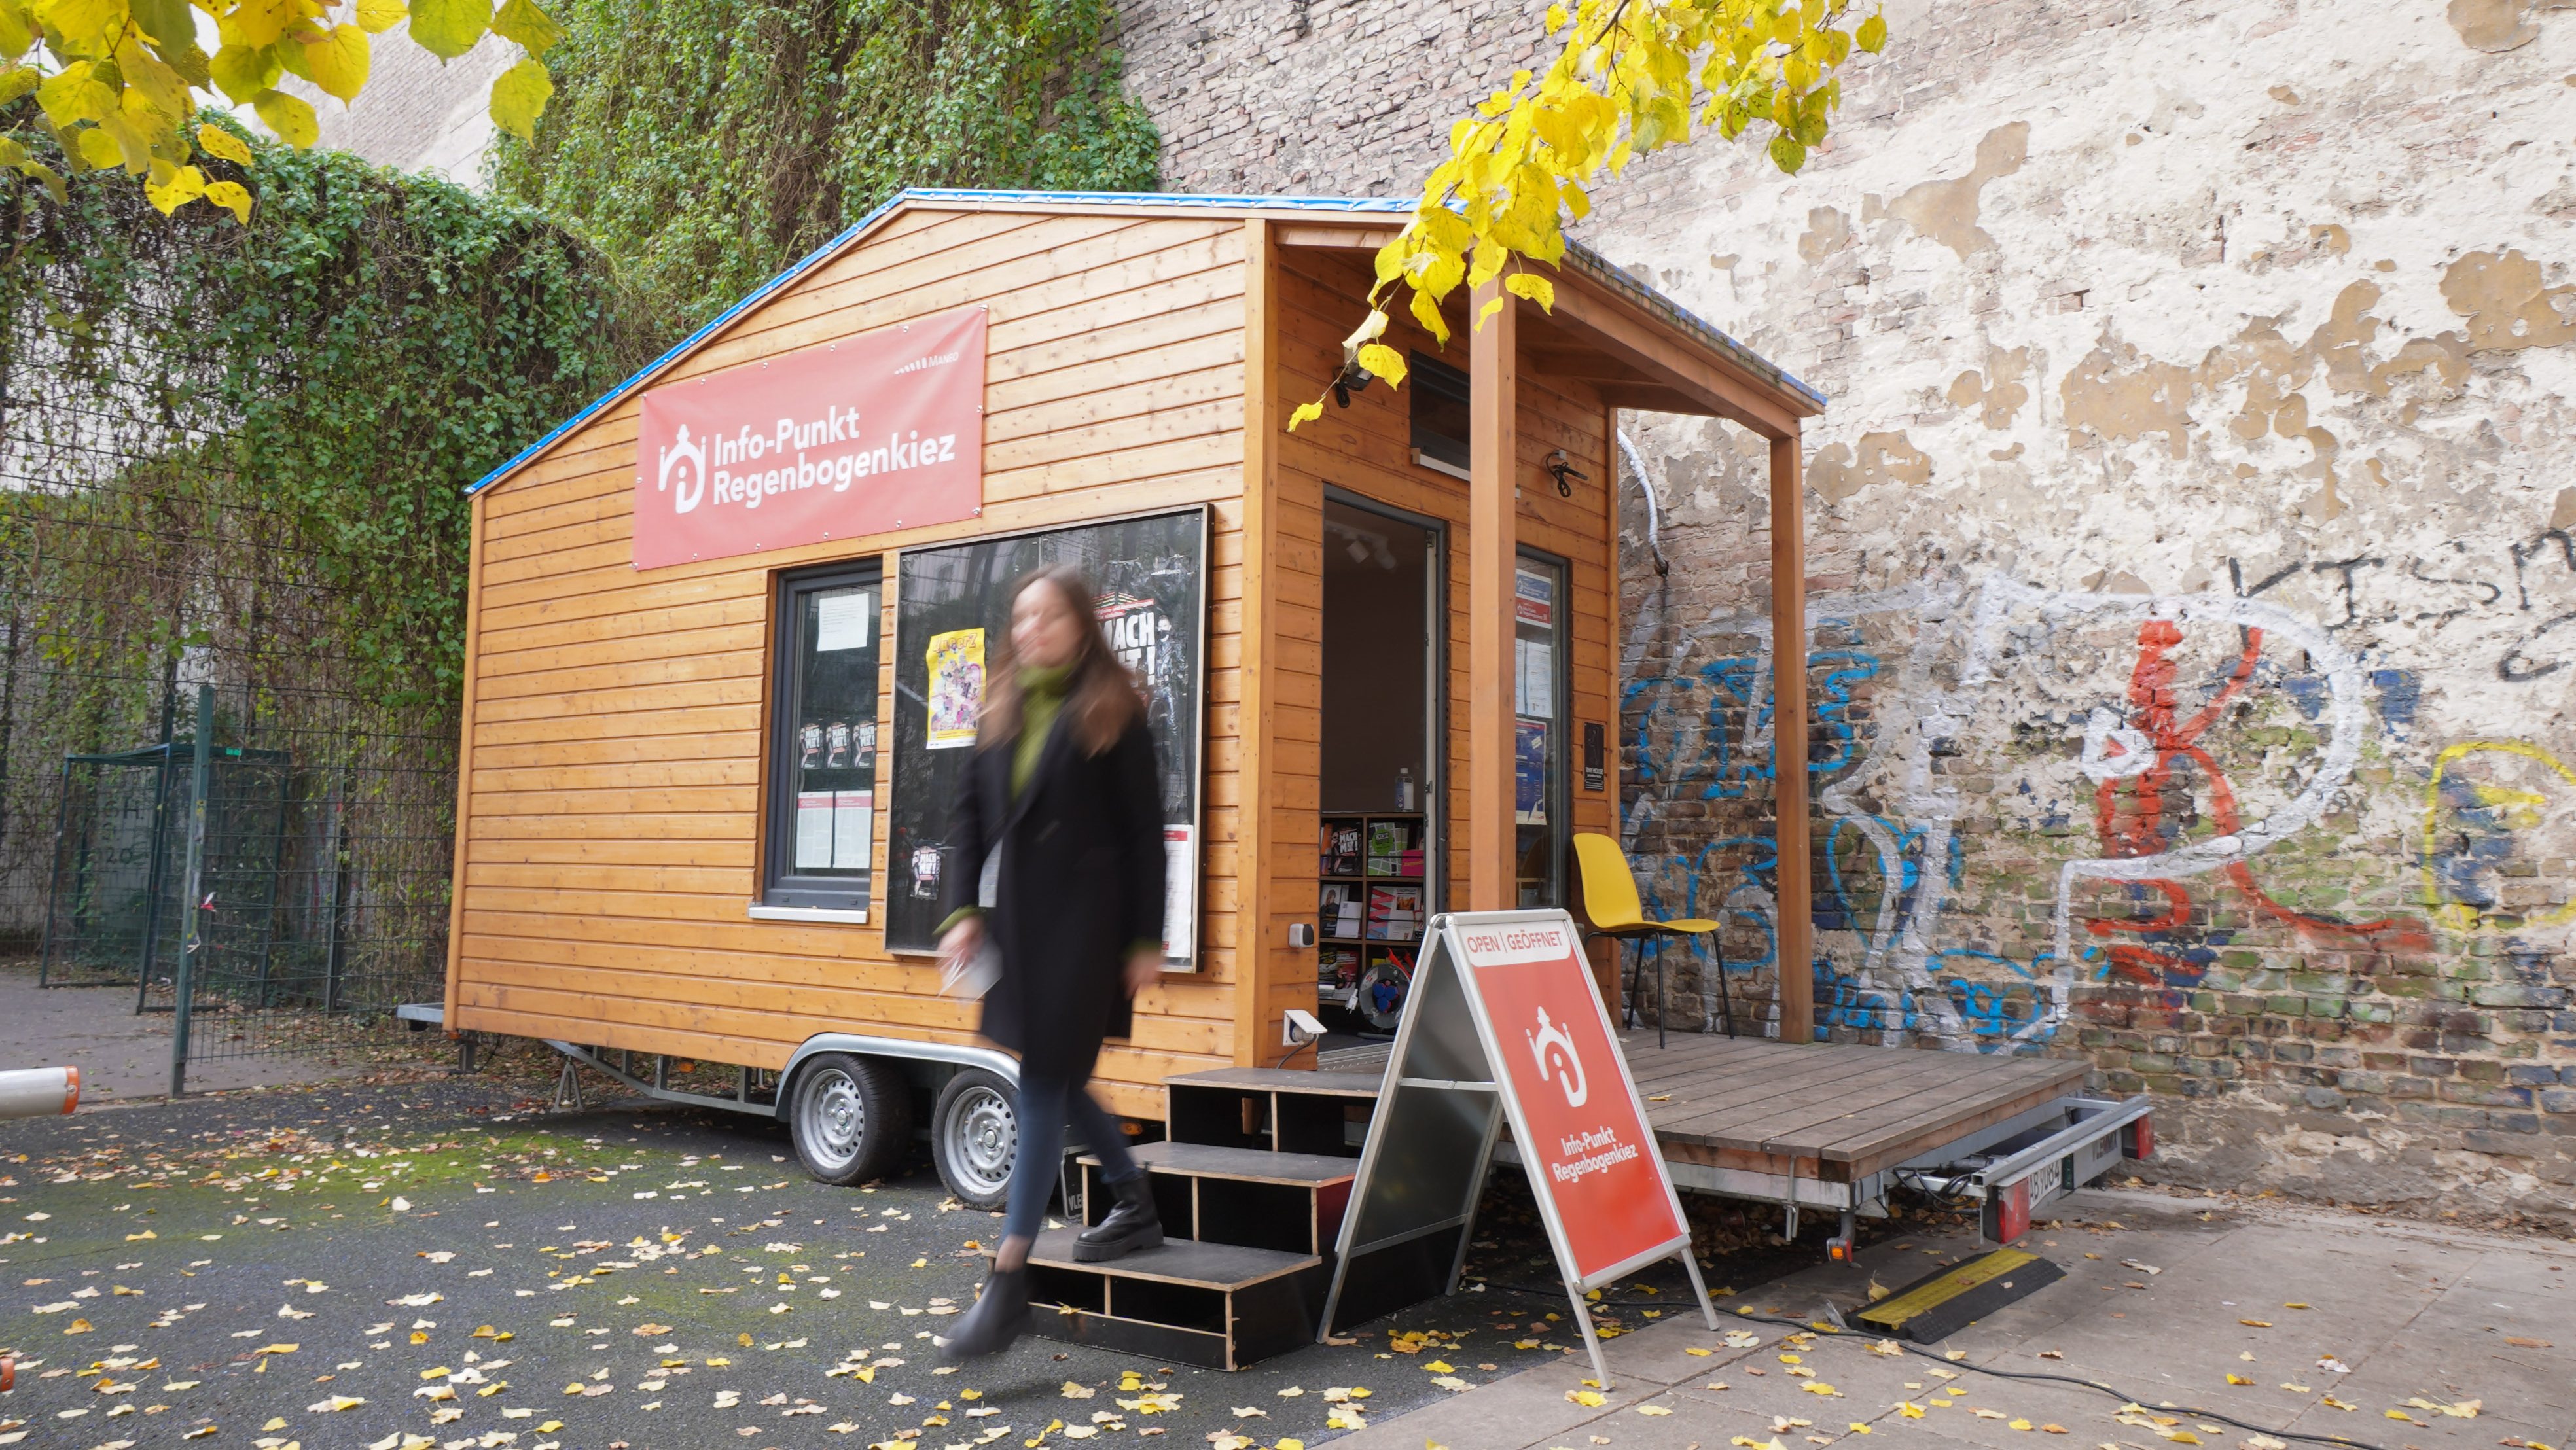 Three Tiny Houses for three Berlin districts